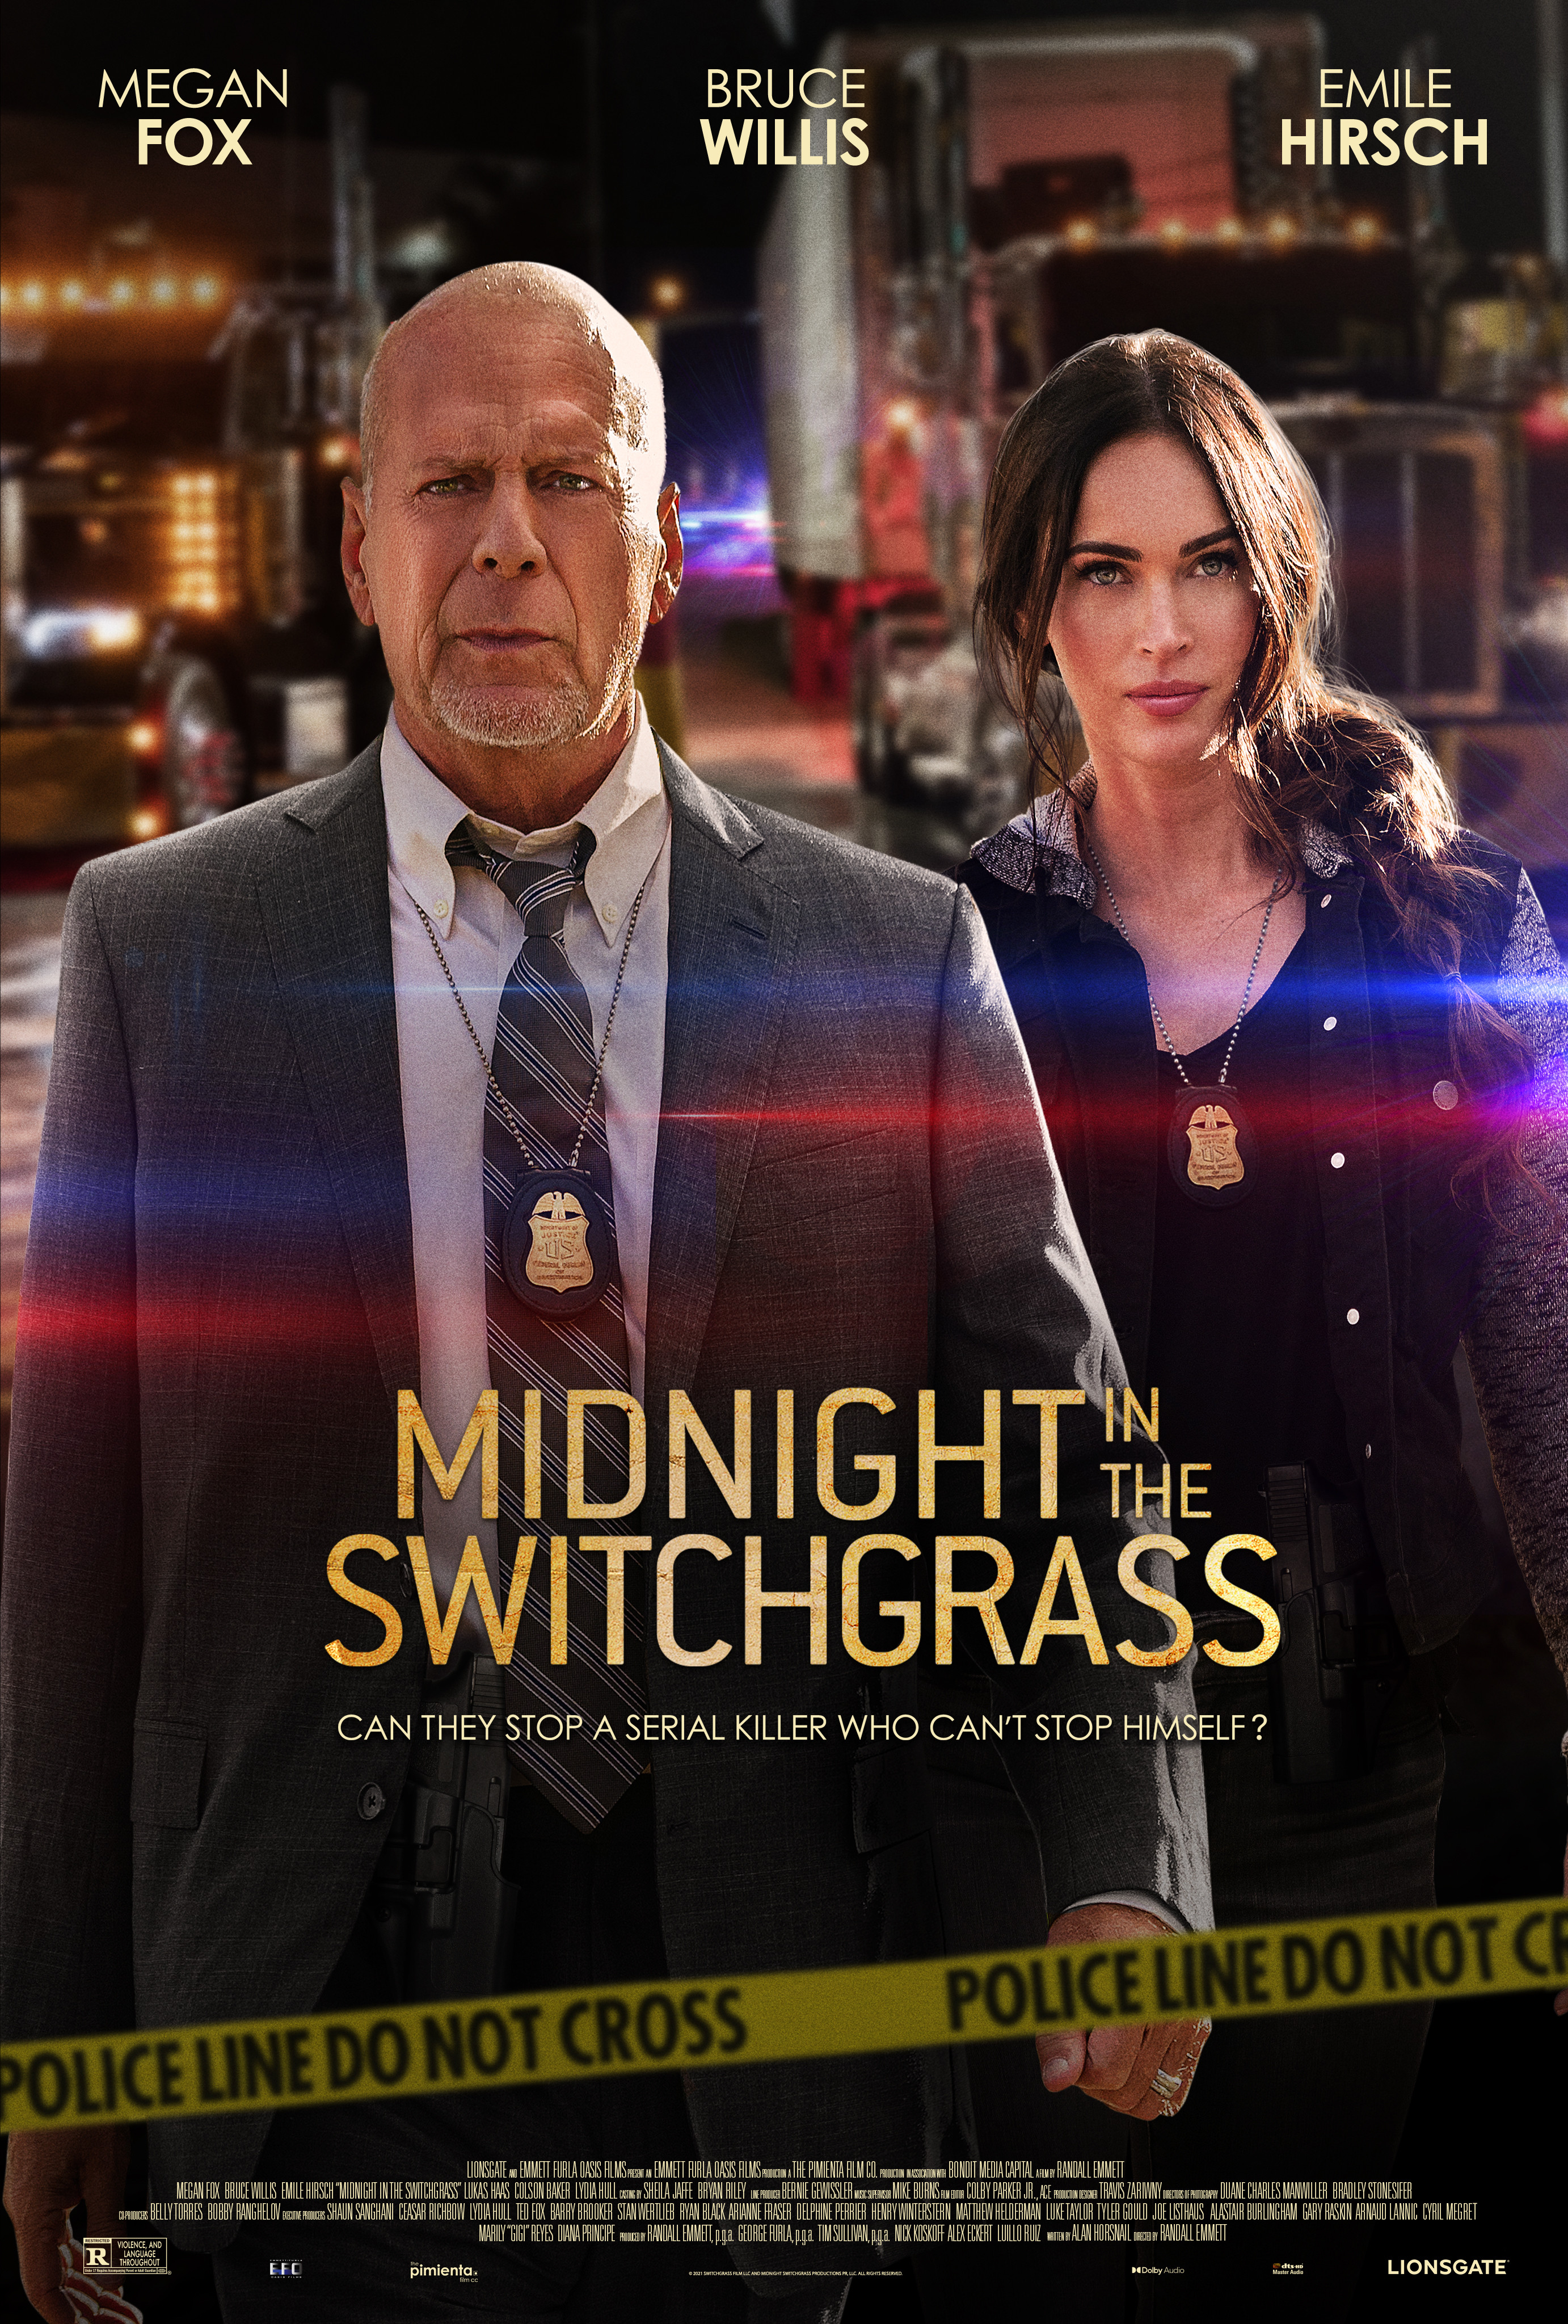 Megan Fox Monster Porn - Midnight in the Switchgrass Reviews - Metacritic